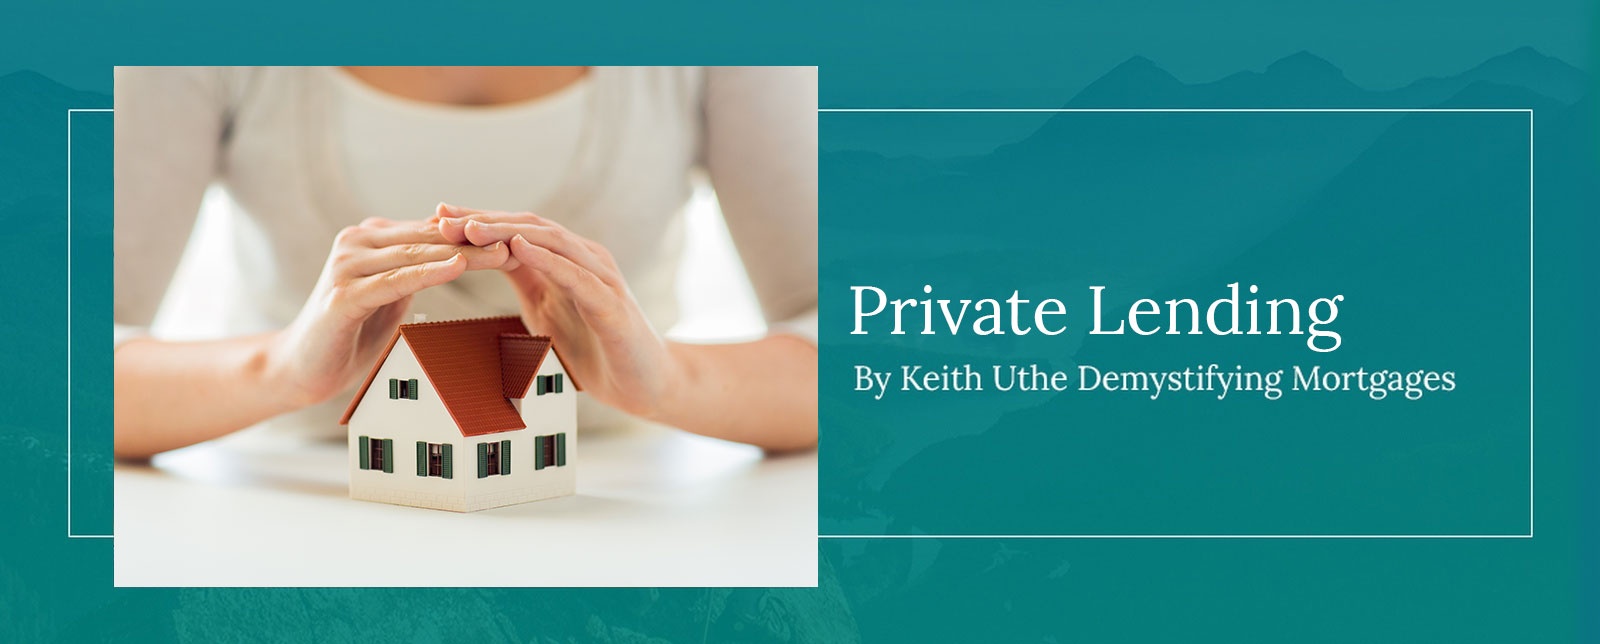 Private Mortgage Lending in Calgary, Alberta by Keith Uthe Demystifying Mortgages